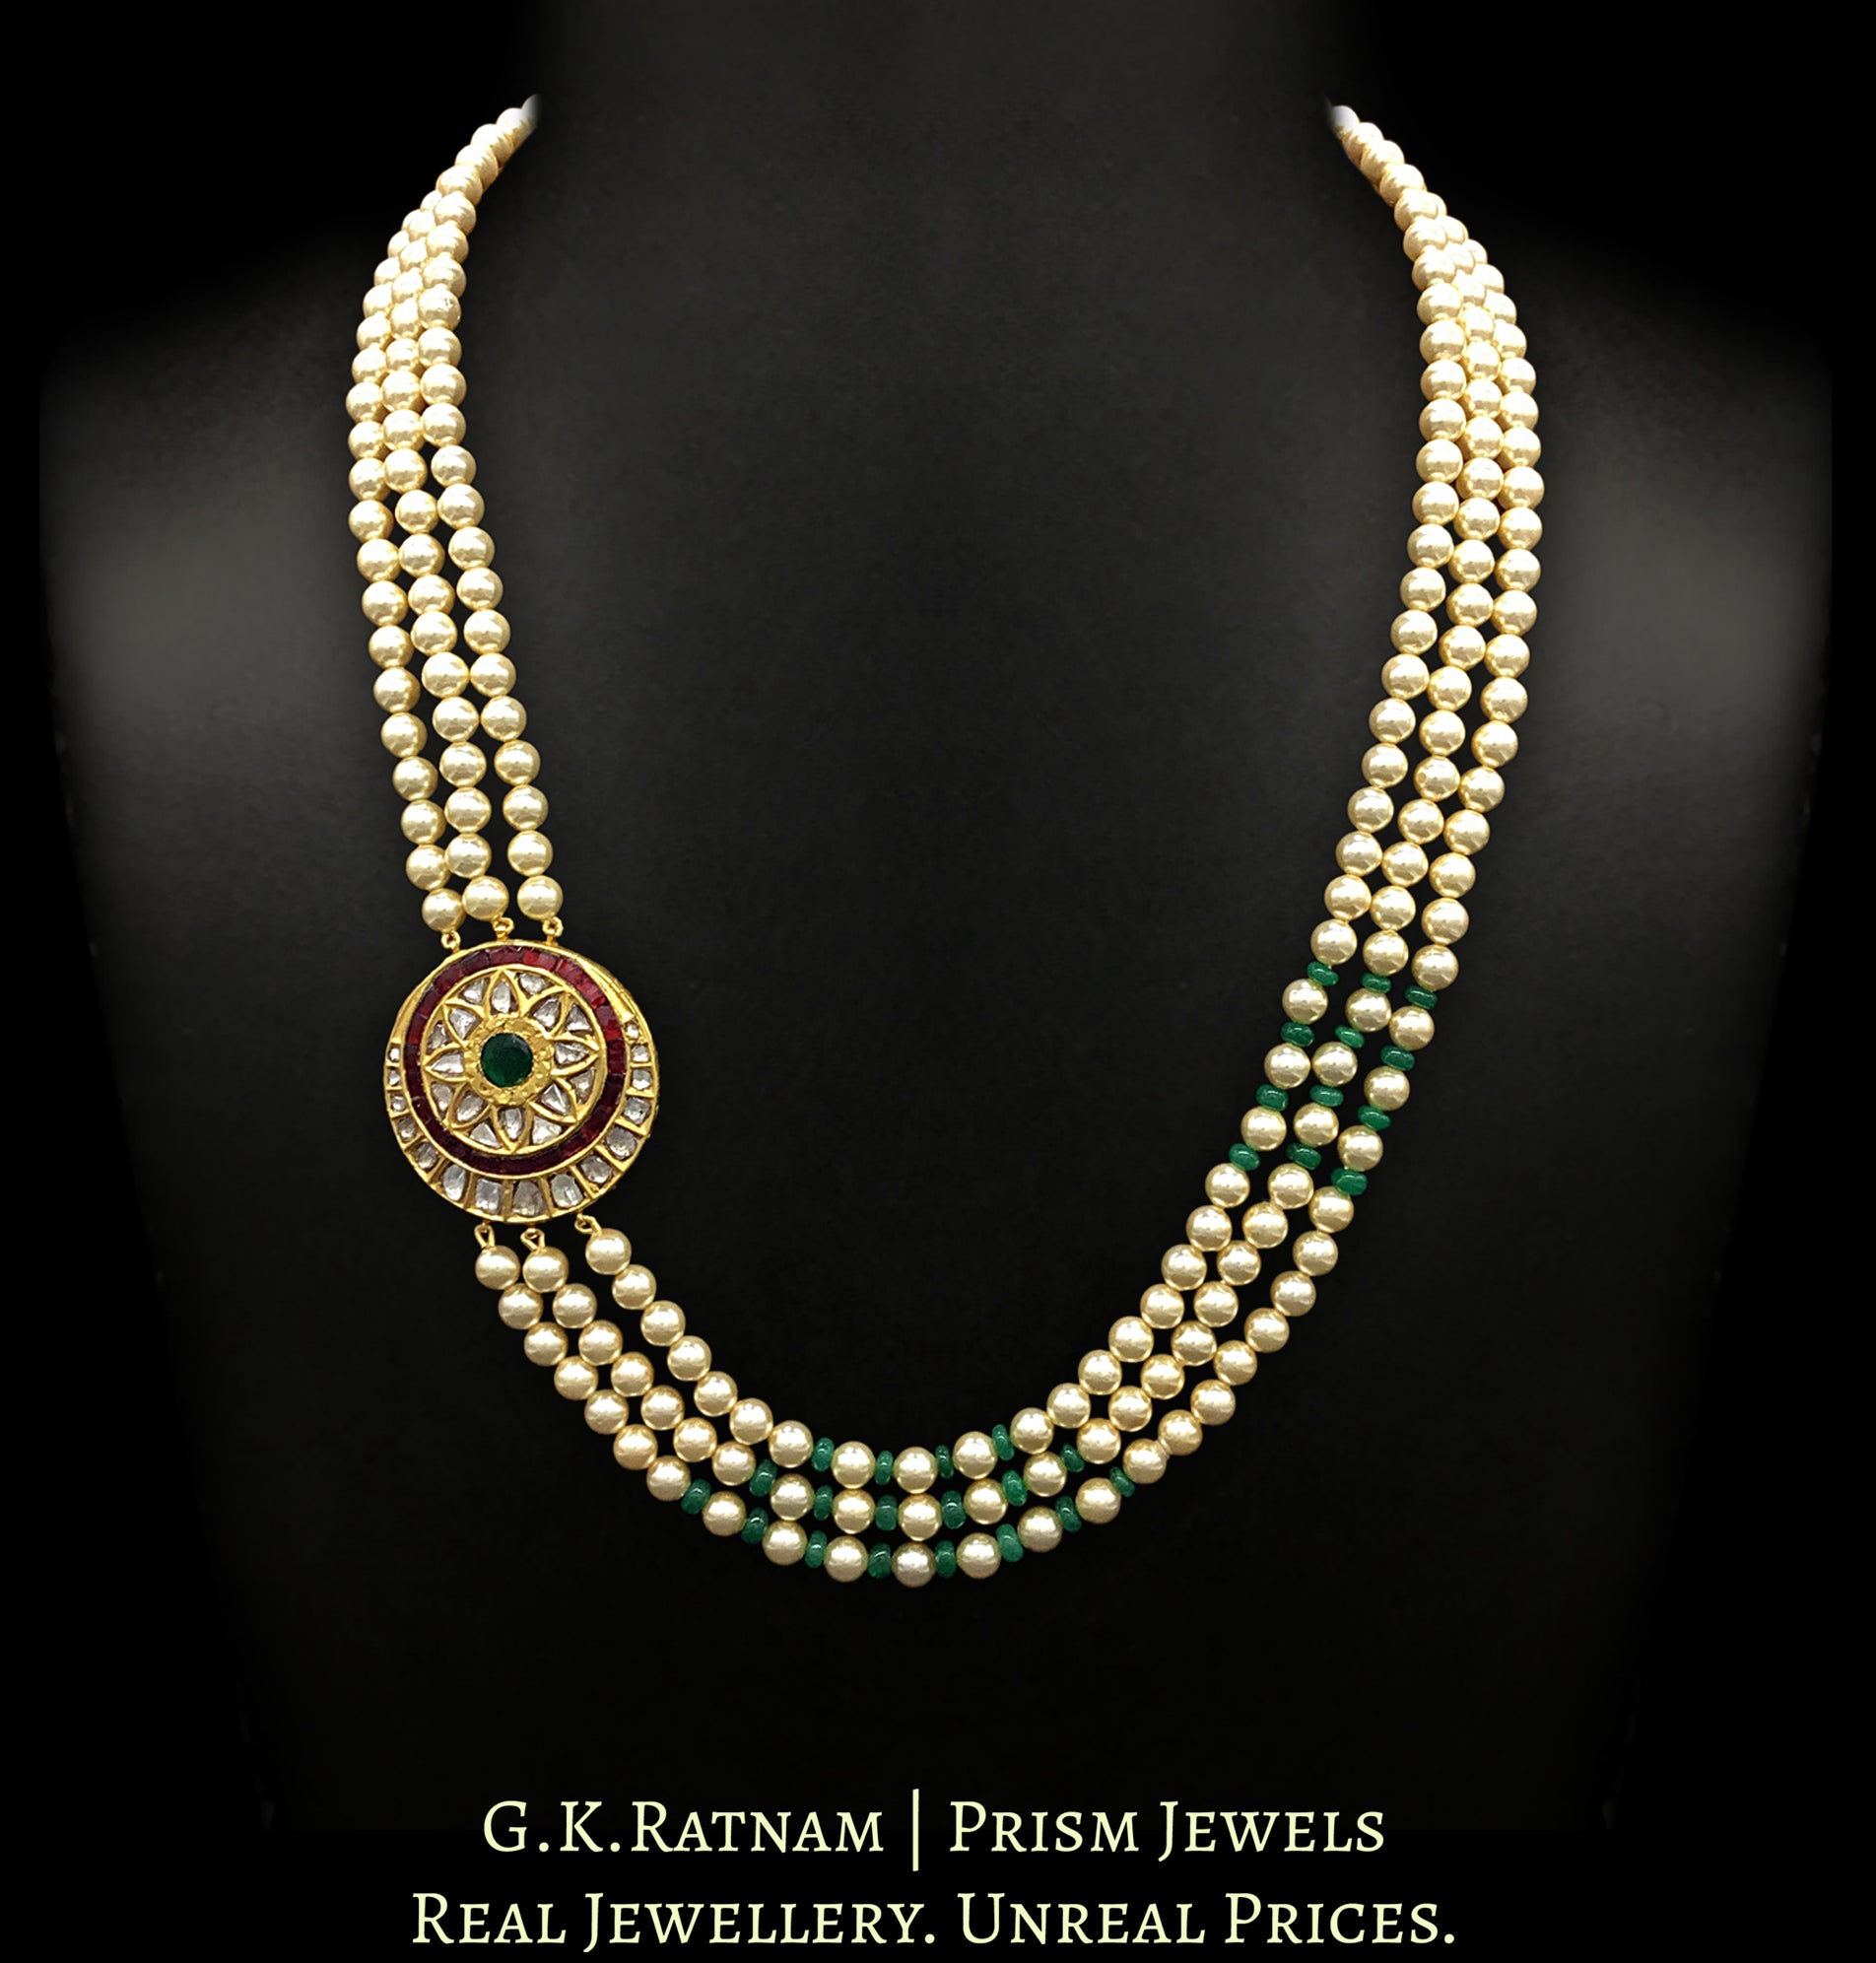 23k Gold and Diamond Polki Broach Necklace with round tikda strung in pearls and emerald-grade green beryls - G. K. Ratnam